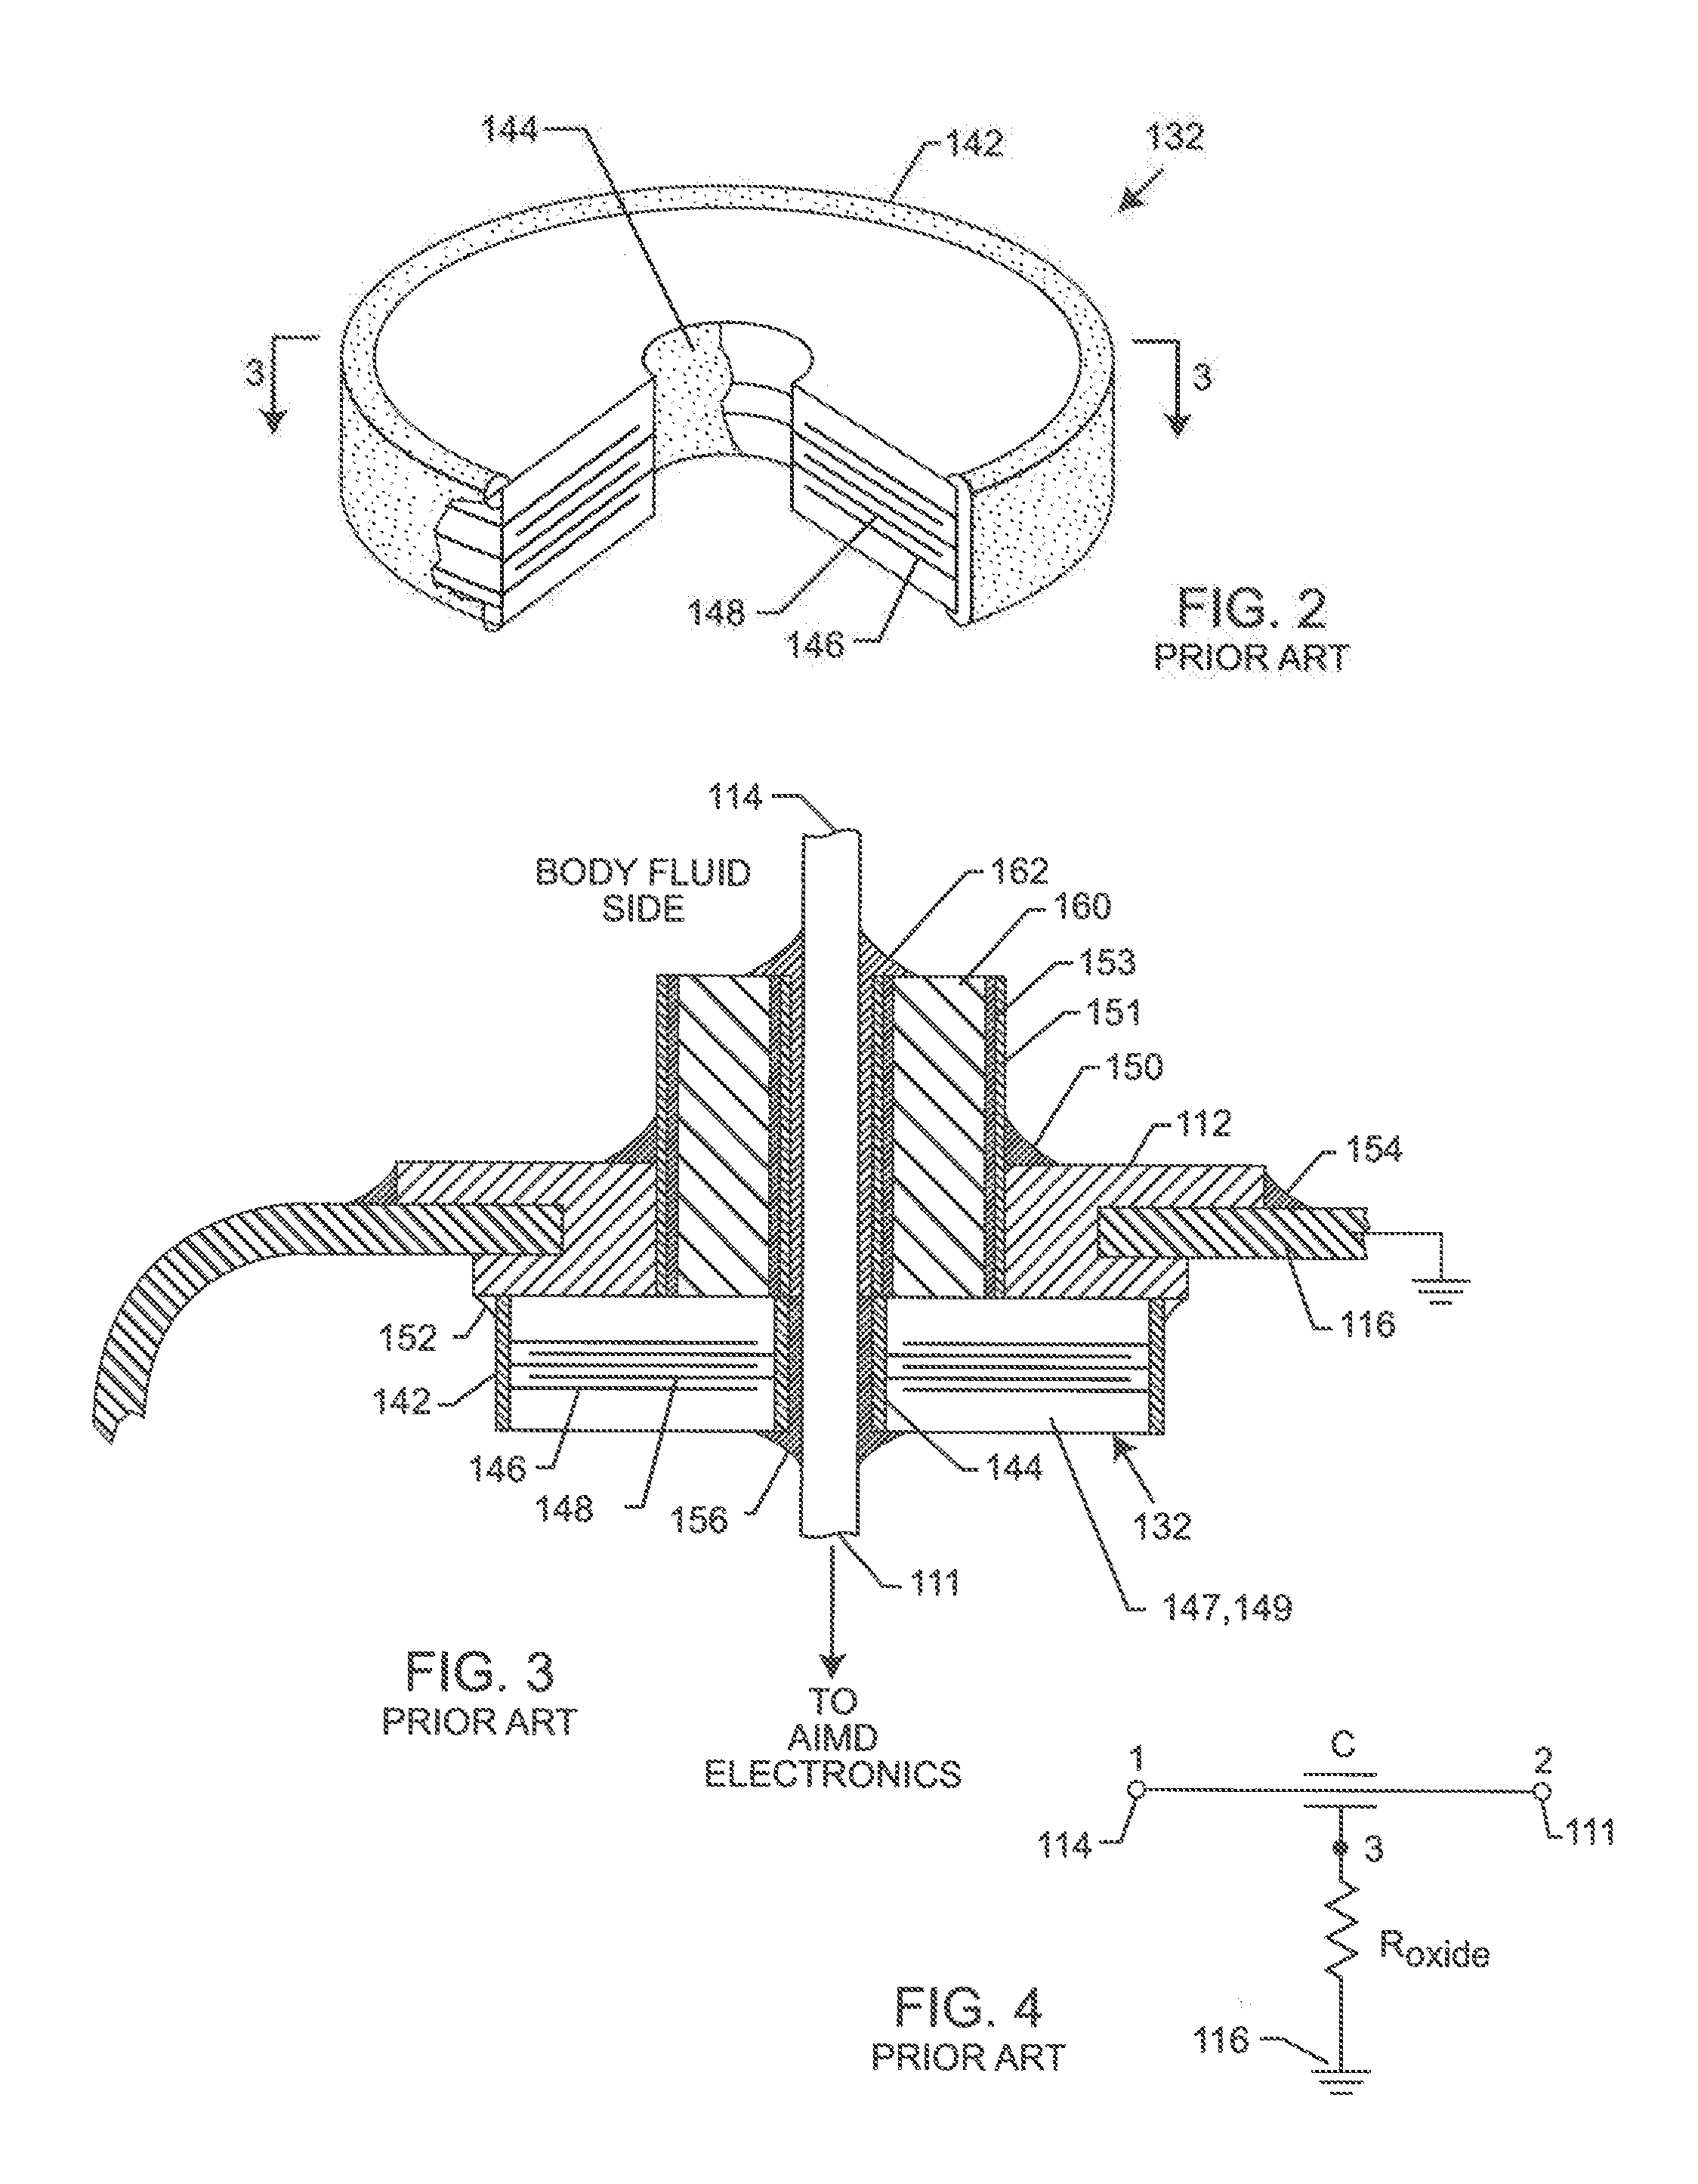 Low impedance oxide resistant grounded capacitor for an aimd